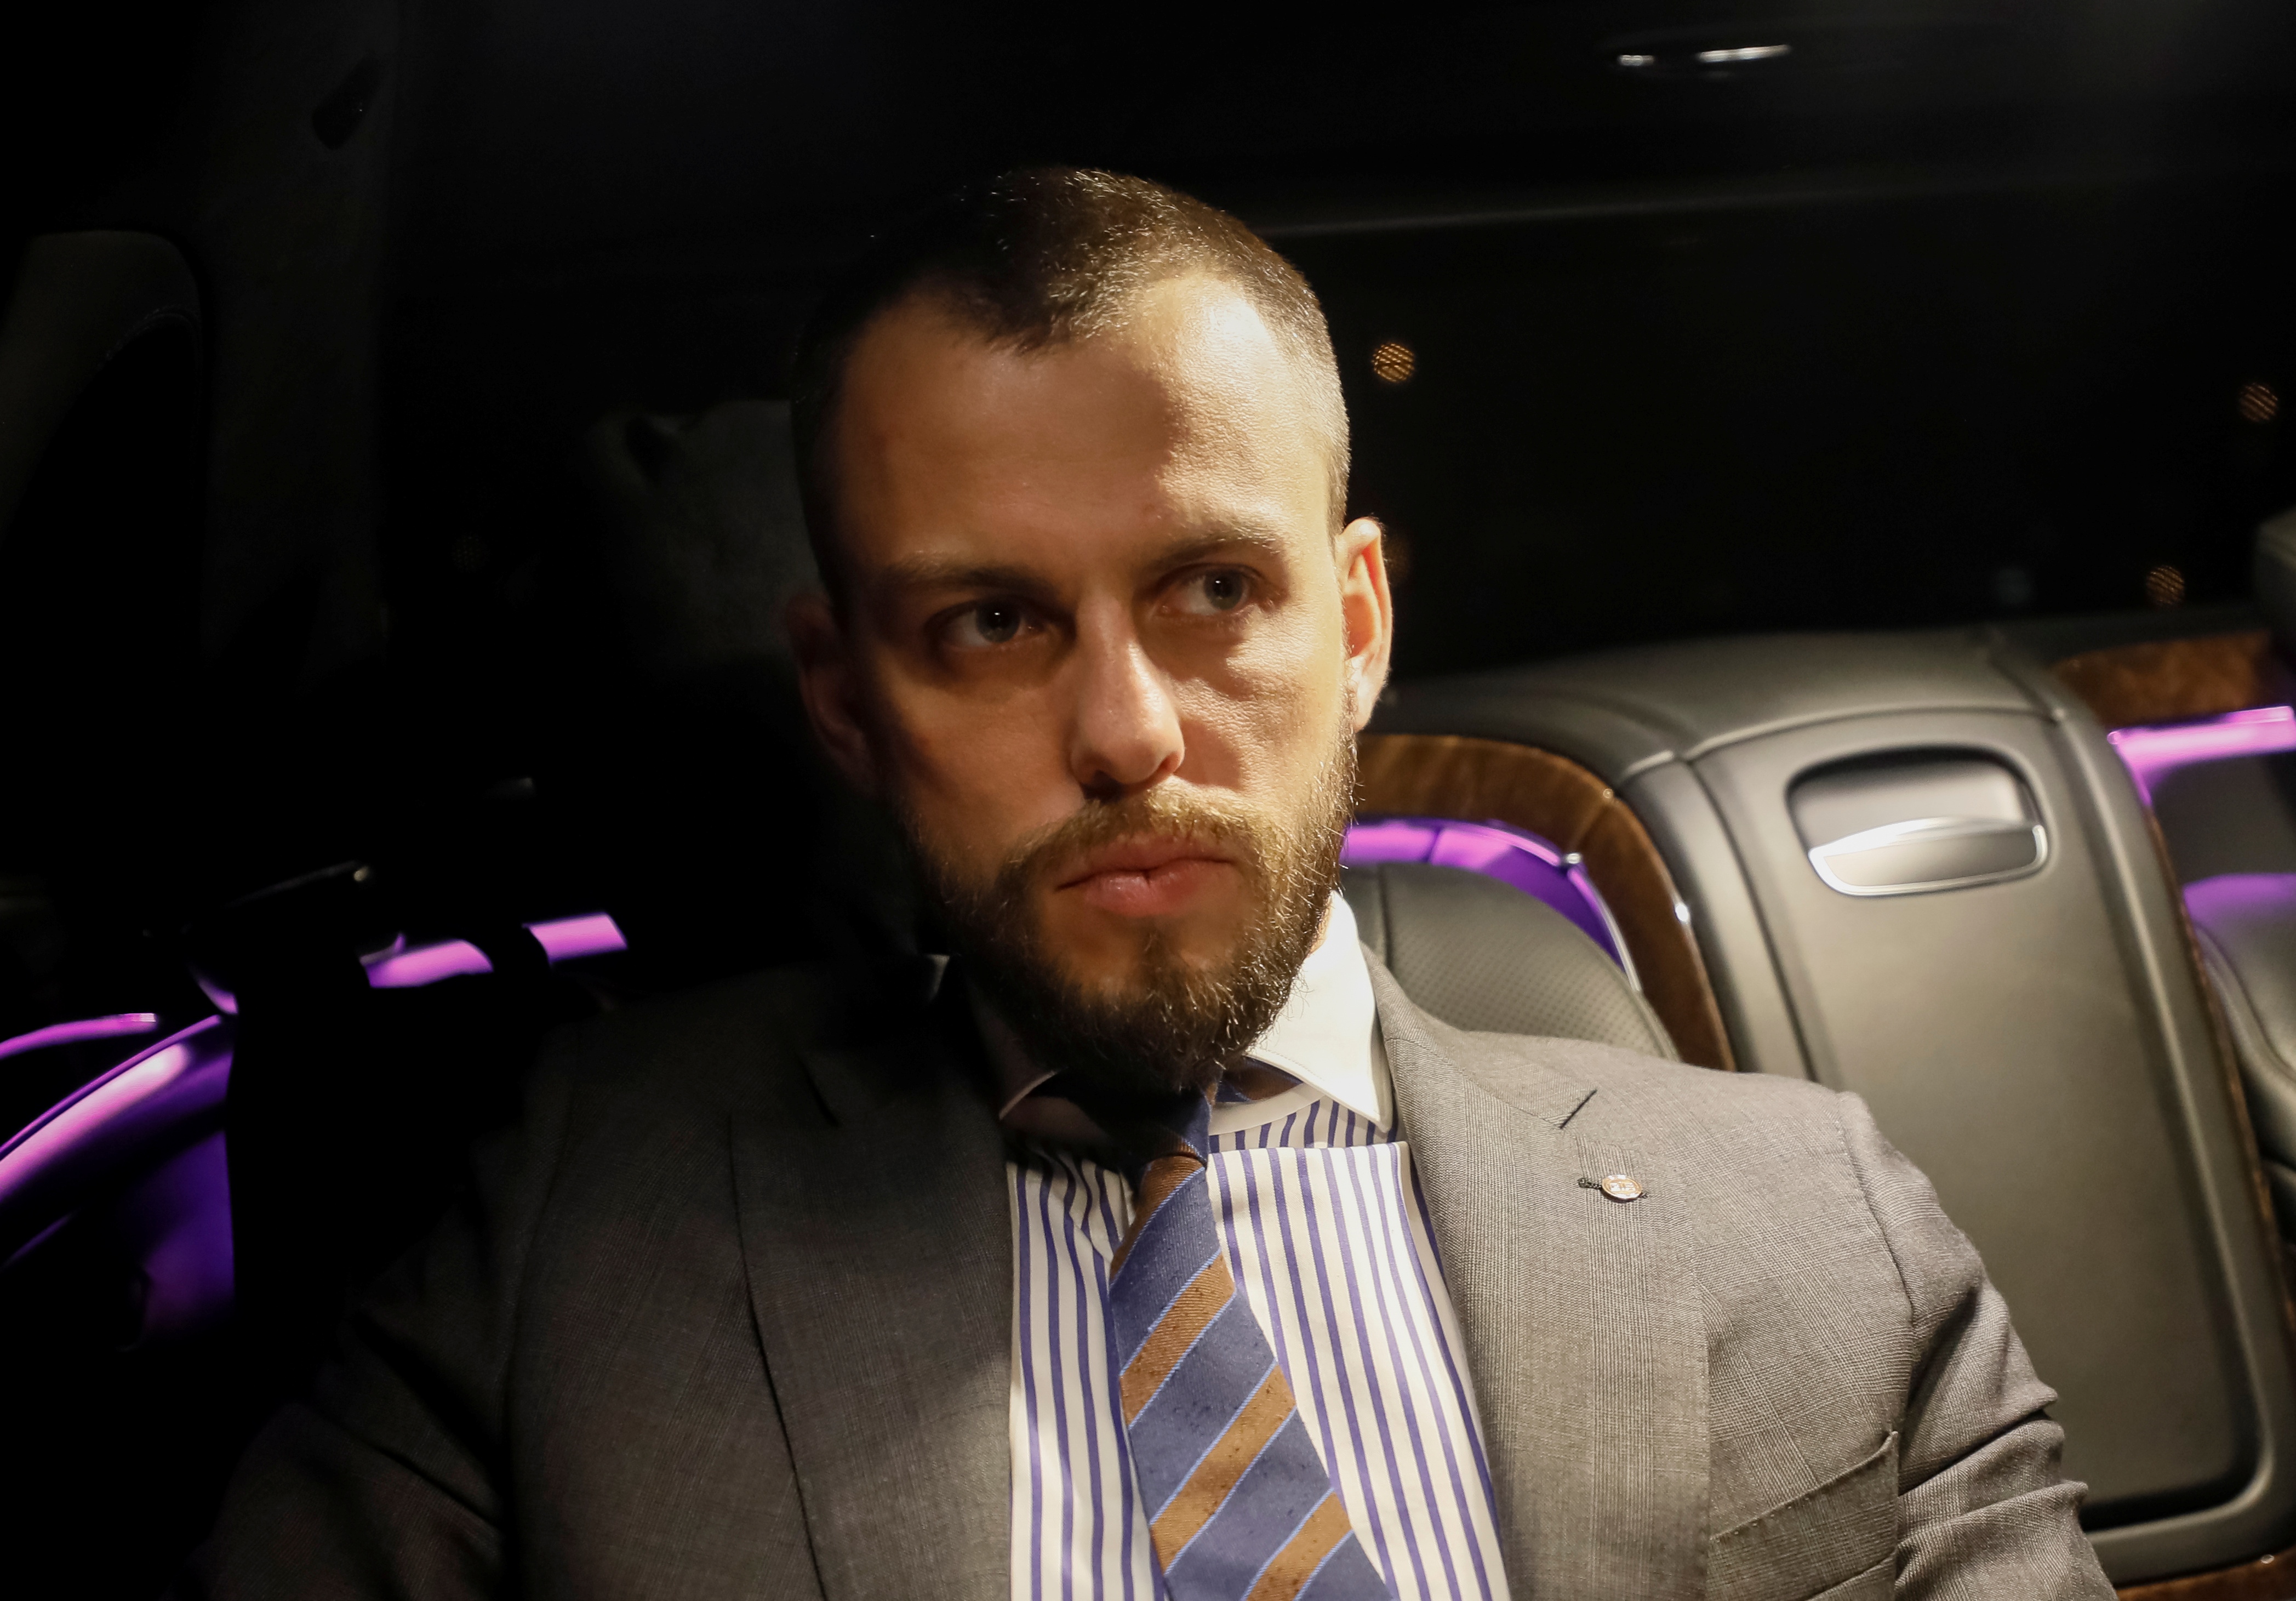 Ilya Sachkov, head of Russia's Group IB cybersecurity company, is seen in a car in Moscow